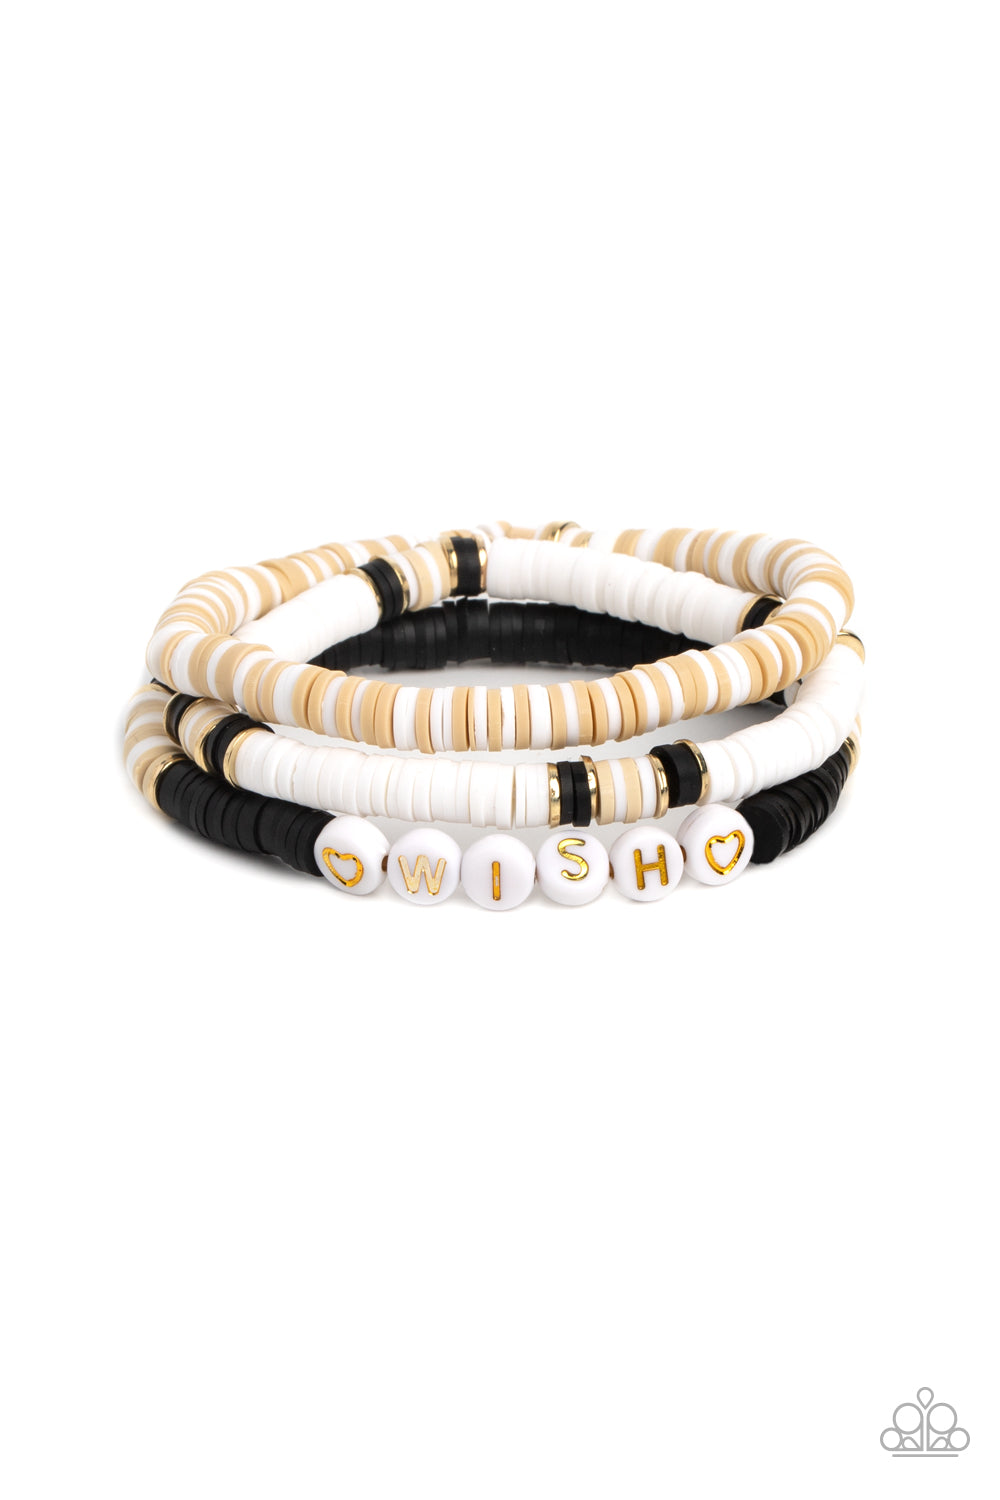 Matriarchal Melody Black Bracelet - Paparazzi Accessories  Varying in shades, tan, black, and white clay discs pair with shiny gold disc beads and accents creating layers across the wrist. Featured on one of the bracelets, white beads stamped with gold lettering spell out the word "wish," while gold heart silhouettes stamped in the same white beads frame the inspirational phrase for a wistful finish.  Sold as one set of three bracelets.  P9SE-BKXX-335XX